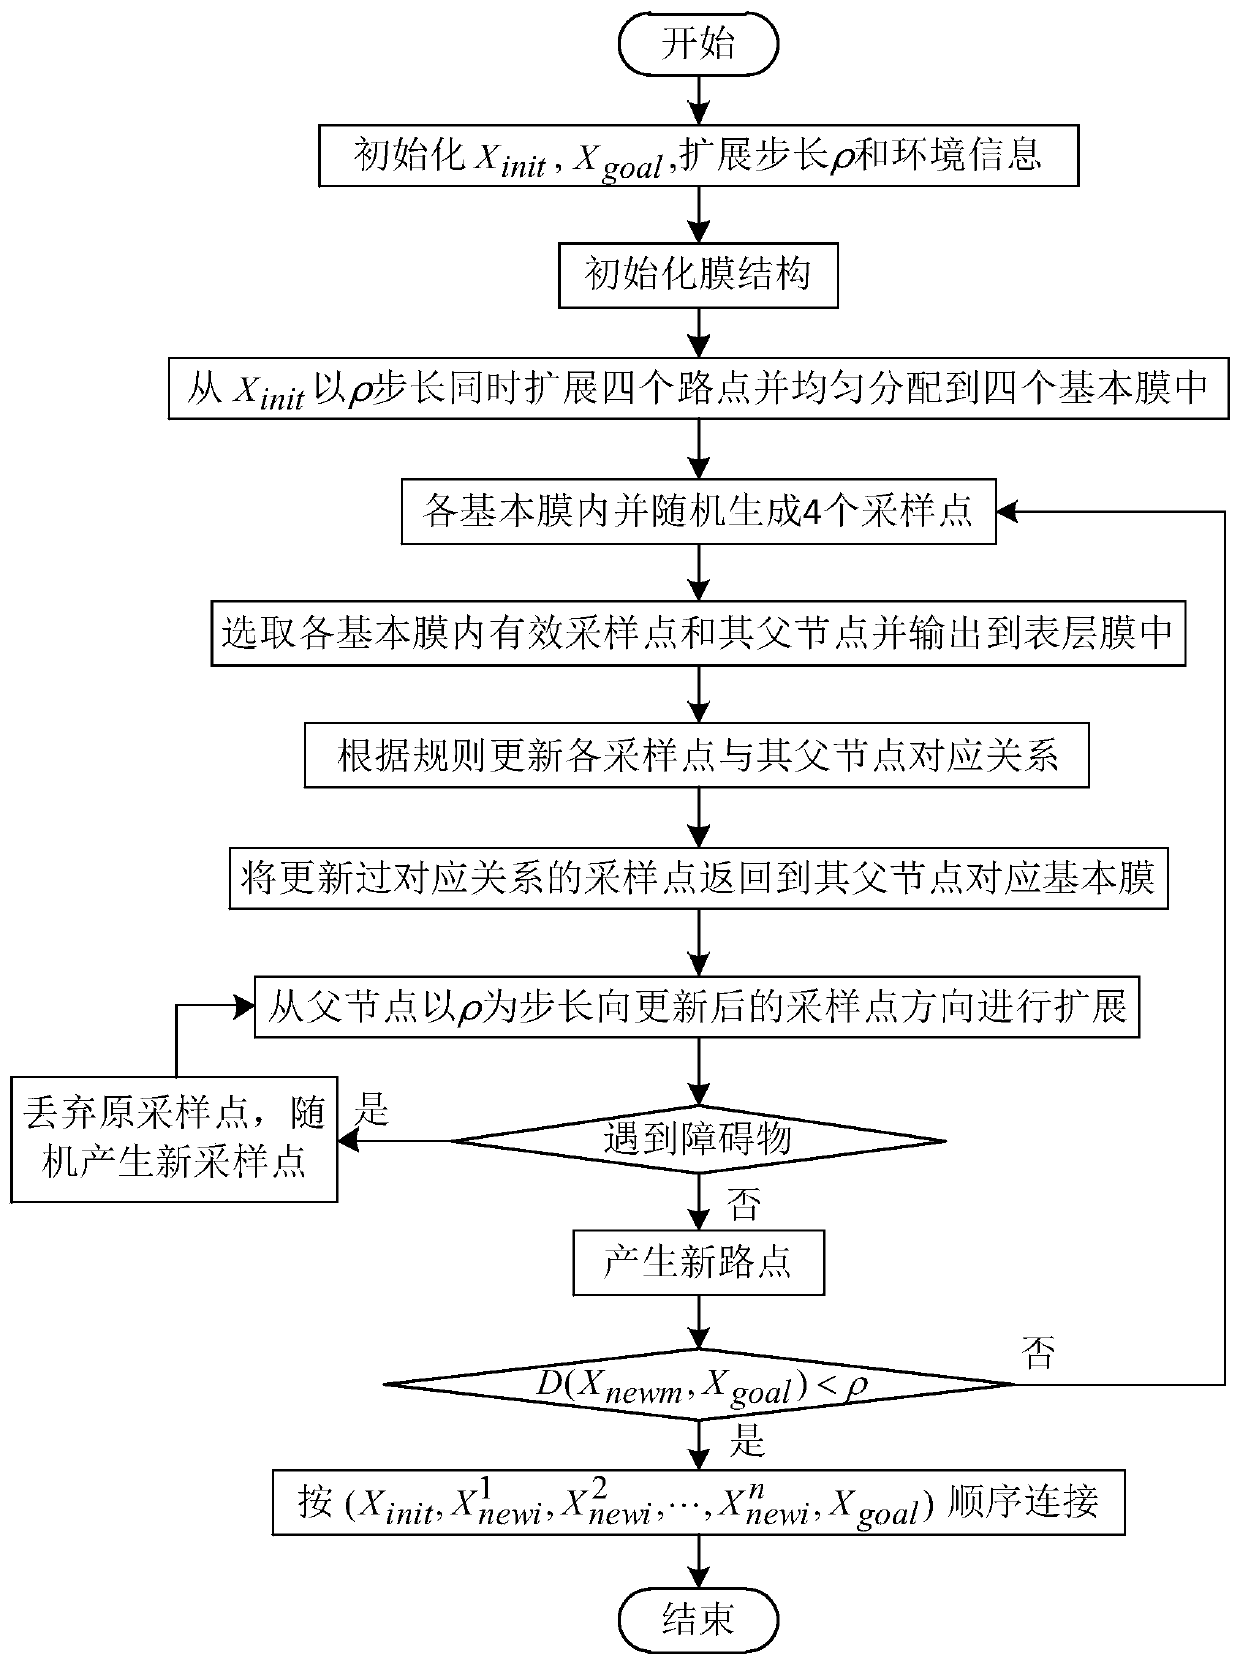 Mobile robot path planning method integrating membrane calculation and RRT